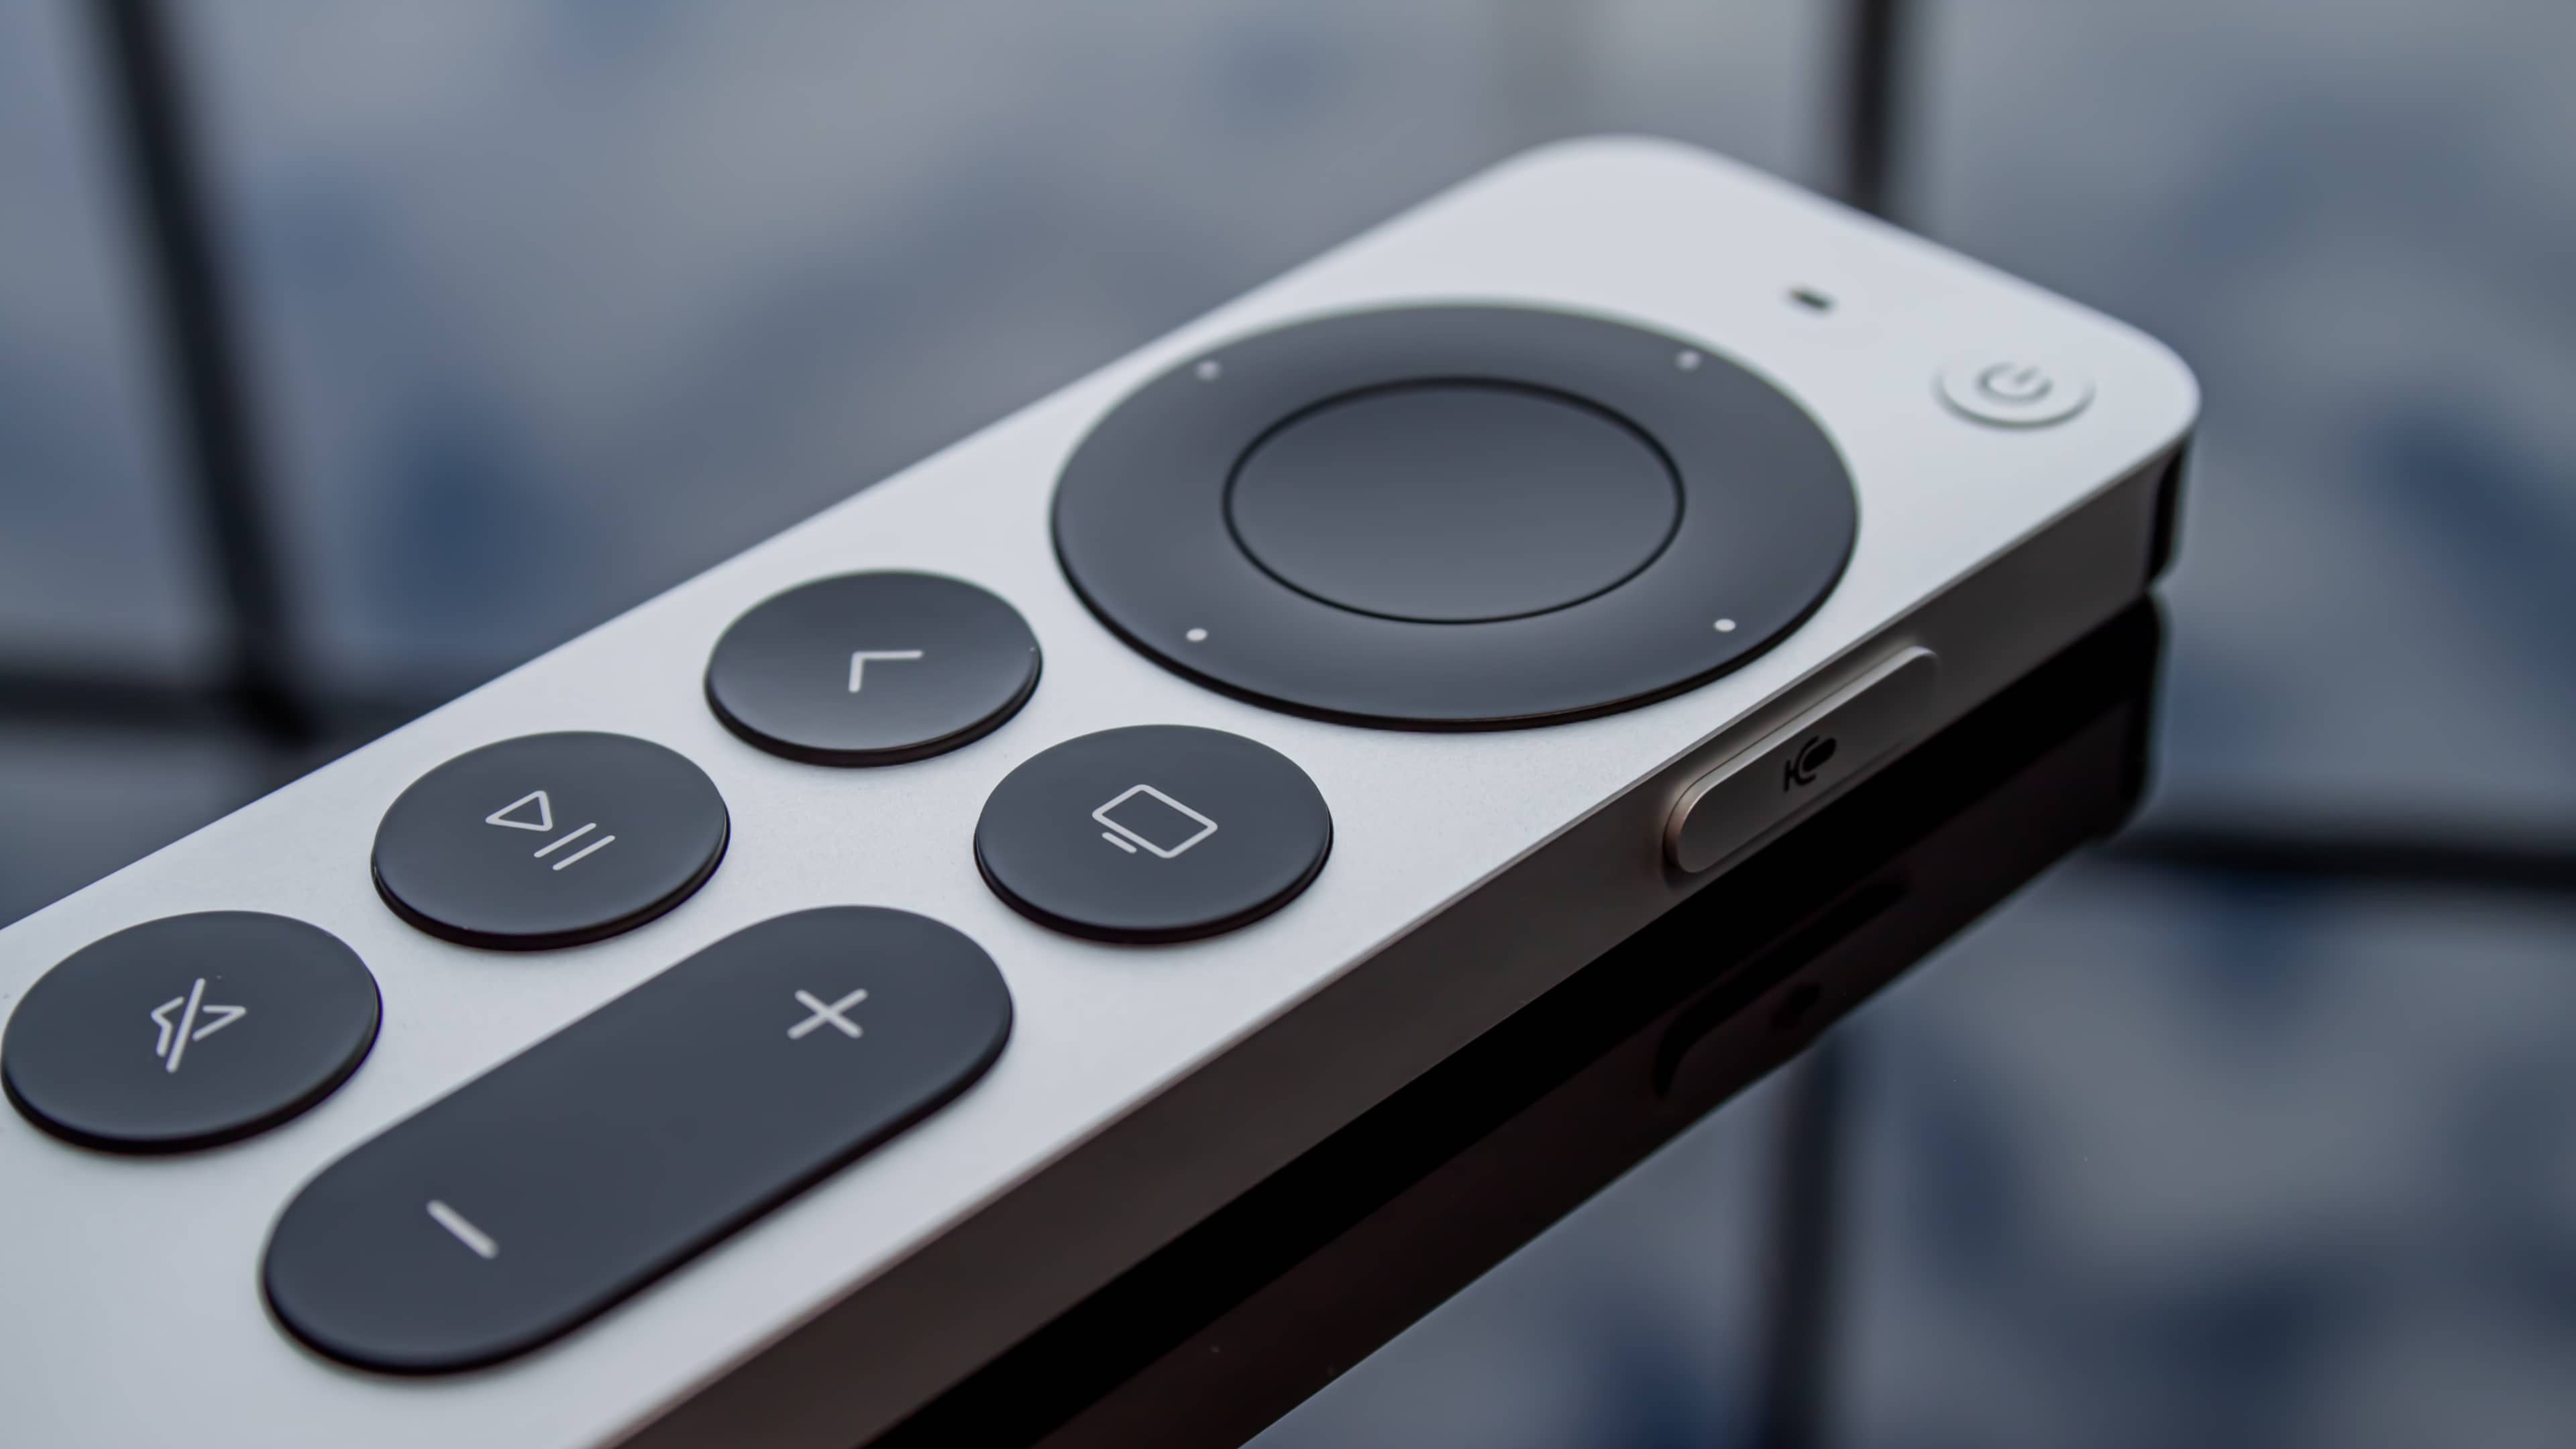 A redesigned Siri-powered remote for the Apple TV streaming box is shown laid flat on its back on a glass table in this close-up photograph.